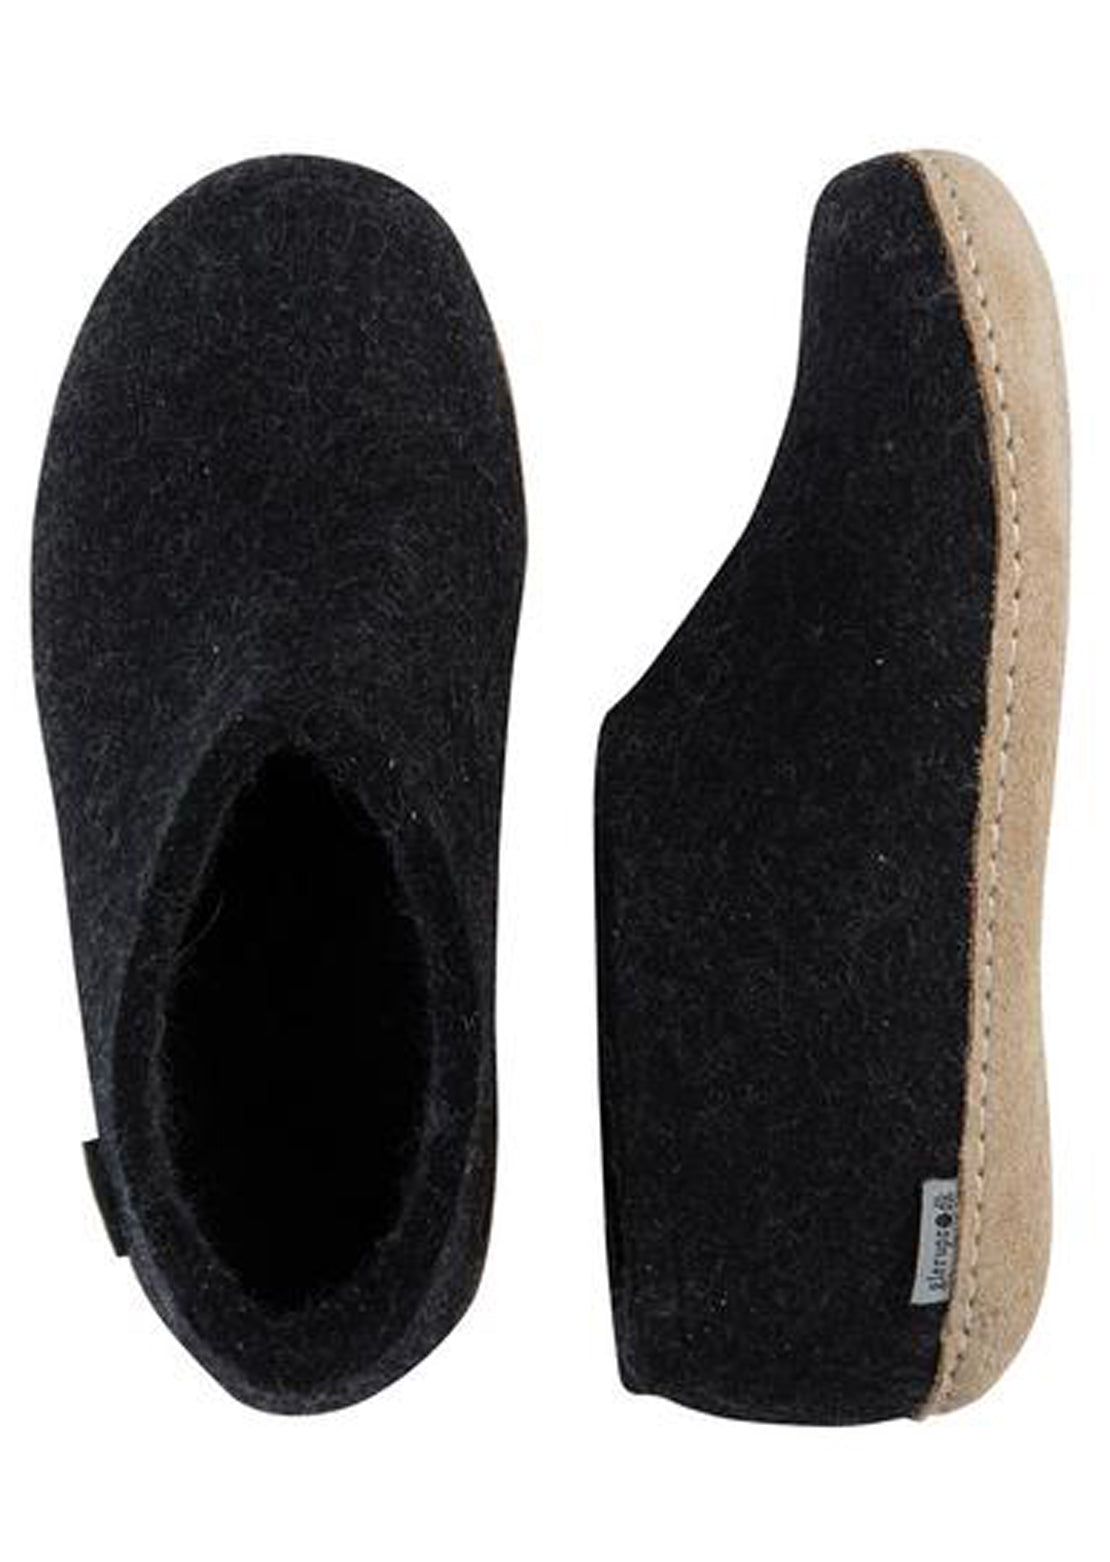 Glerups Unisex Leather Sole Slipper Shoes Charcoal